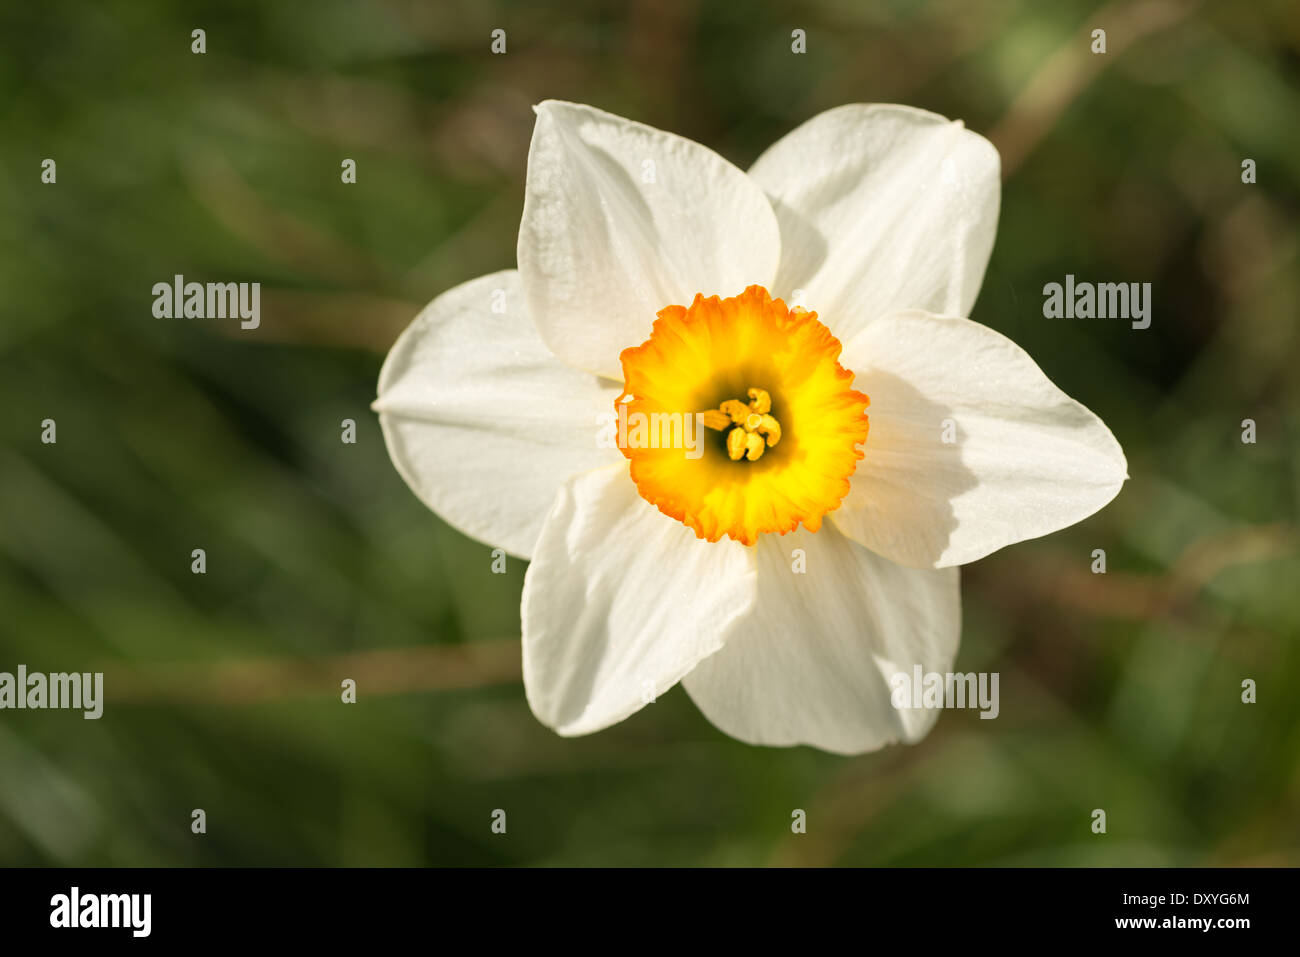 Spring flowers white Narcissus daffodil bunch flowers Stock Photo